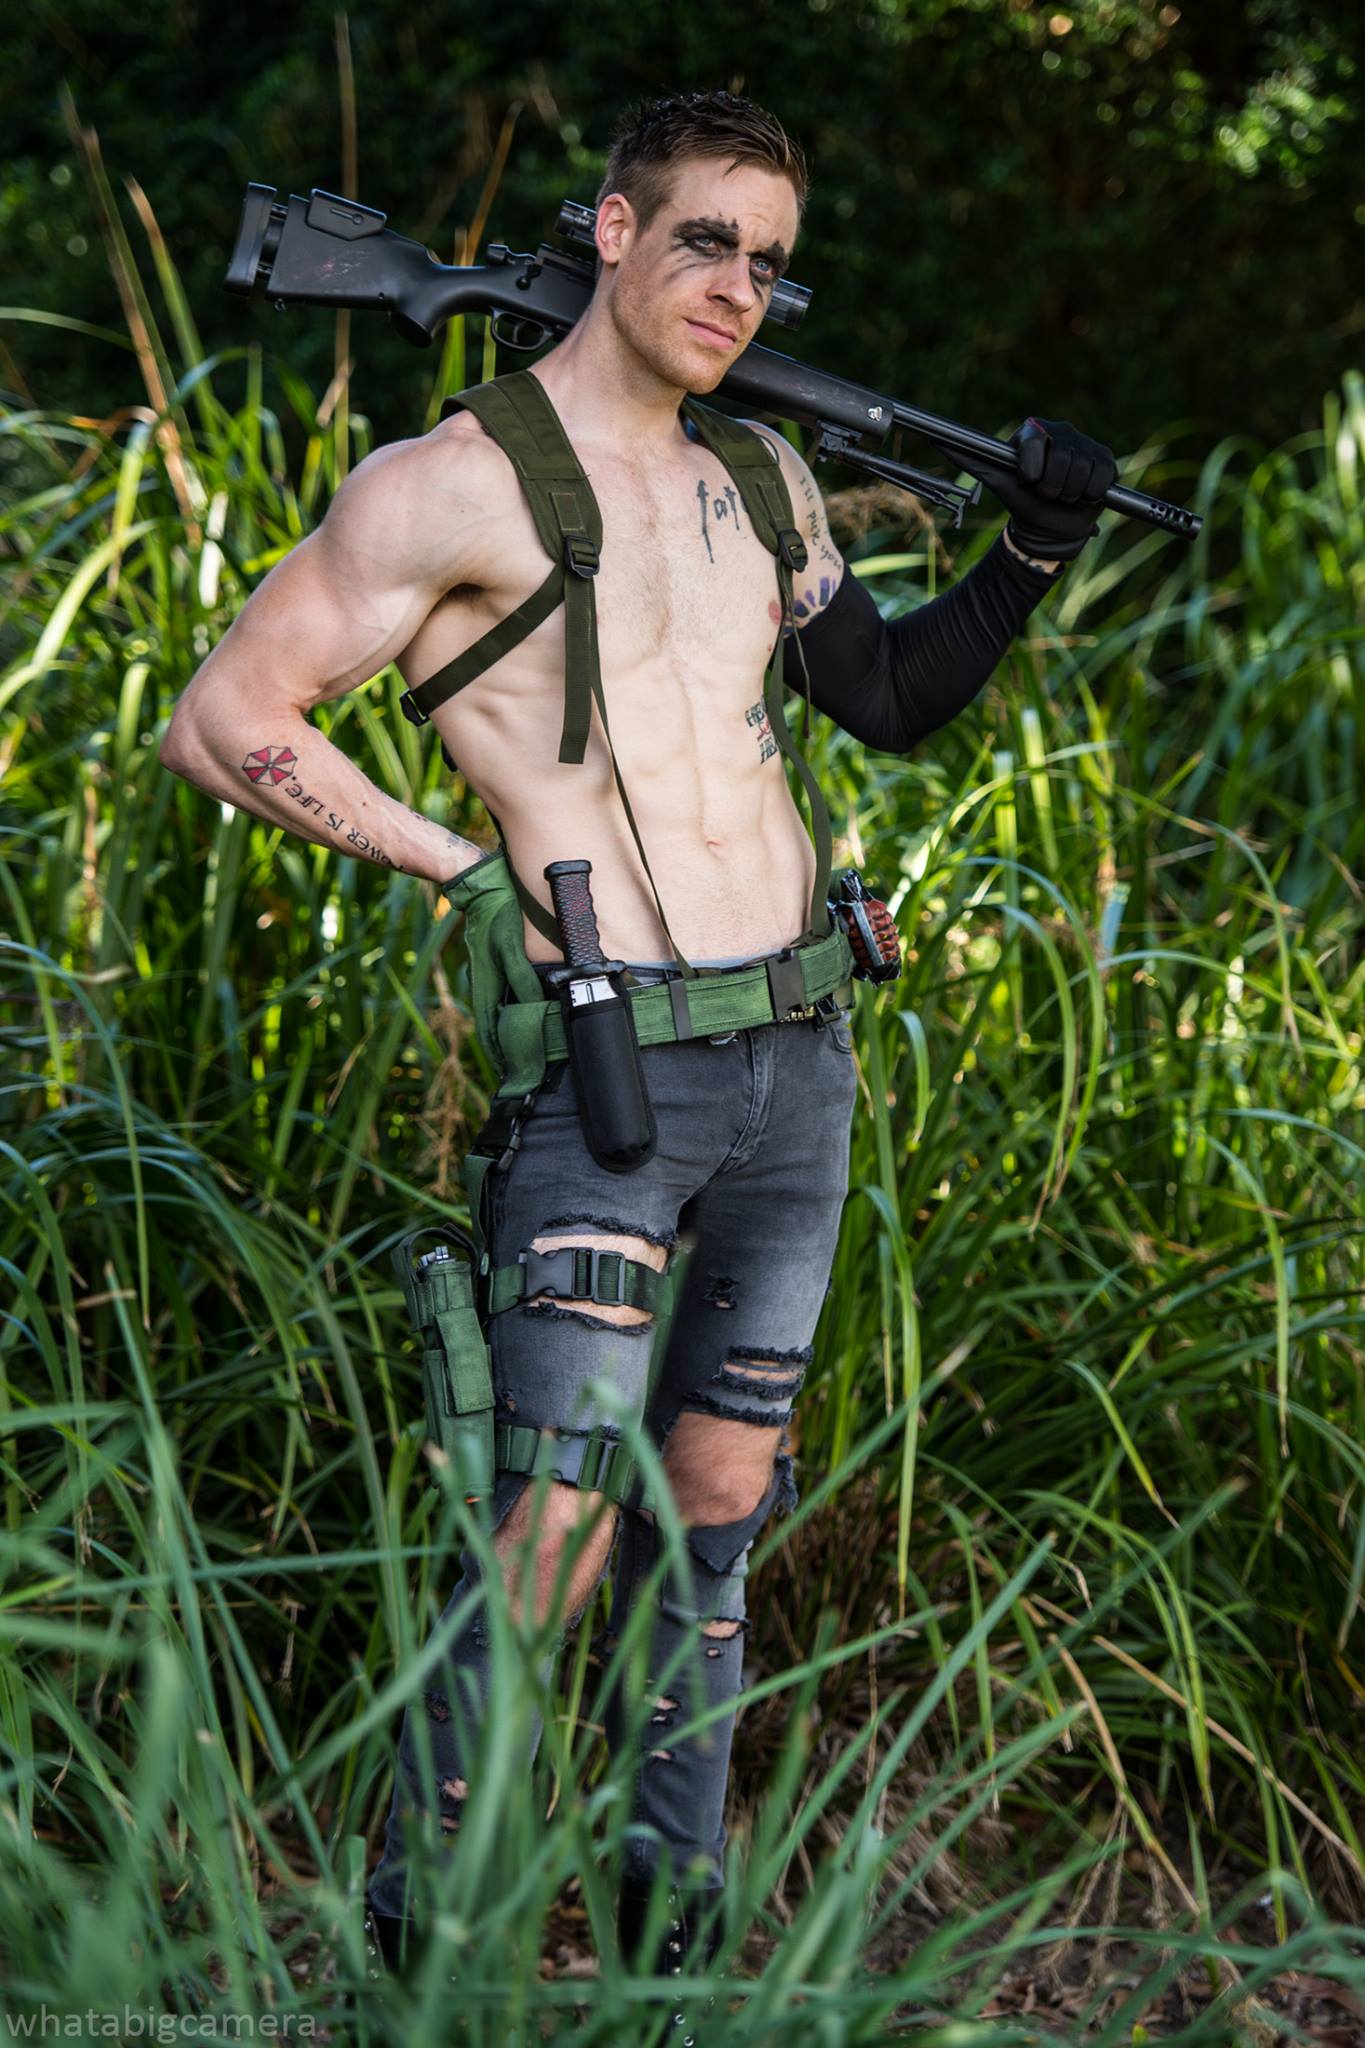 A Different Kind Of Sexy Metal Gear Cosplay